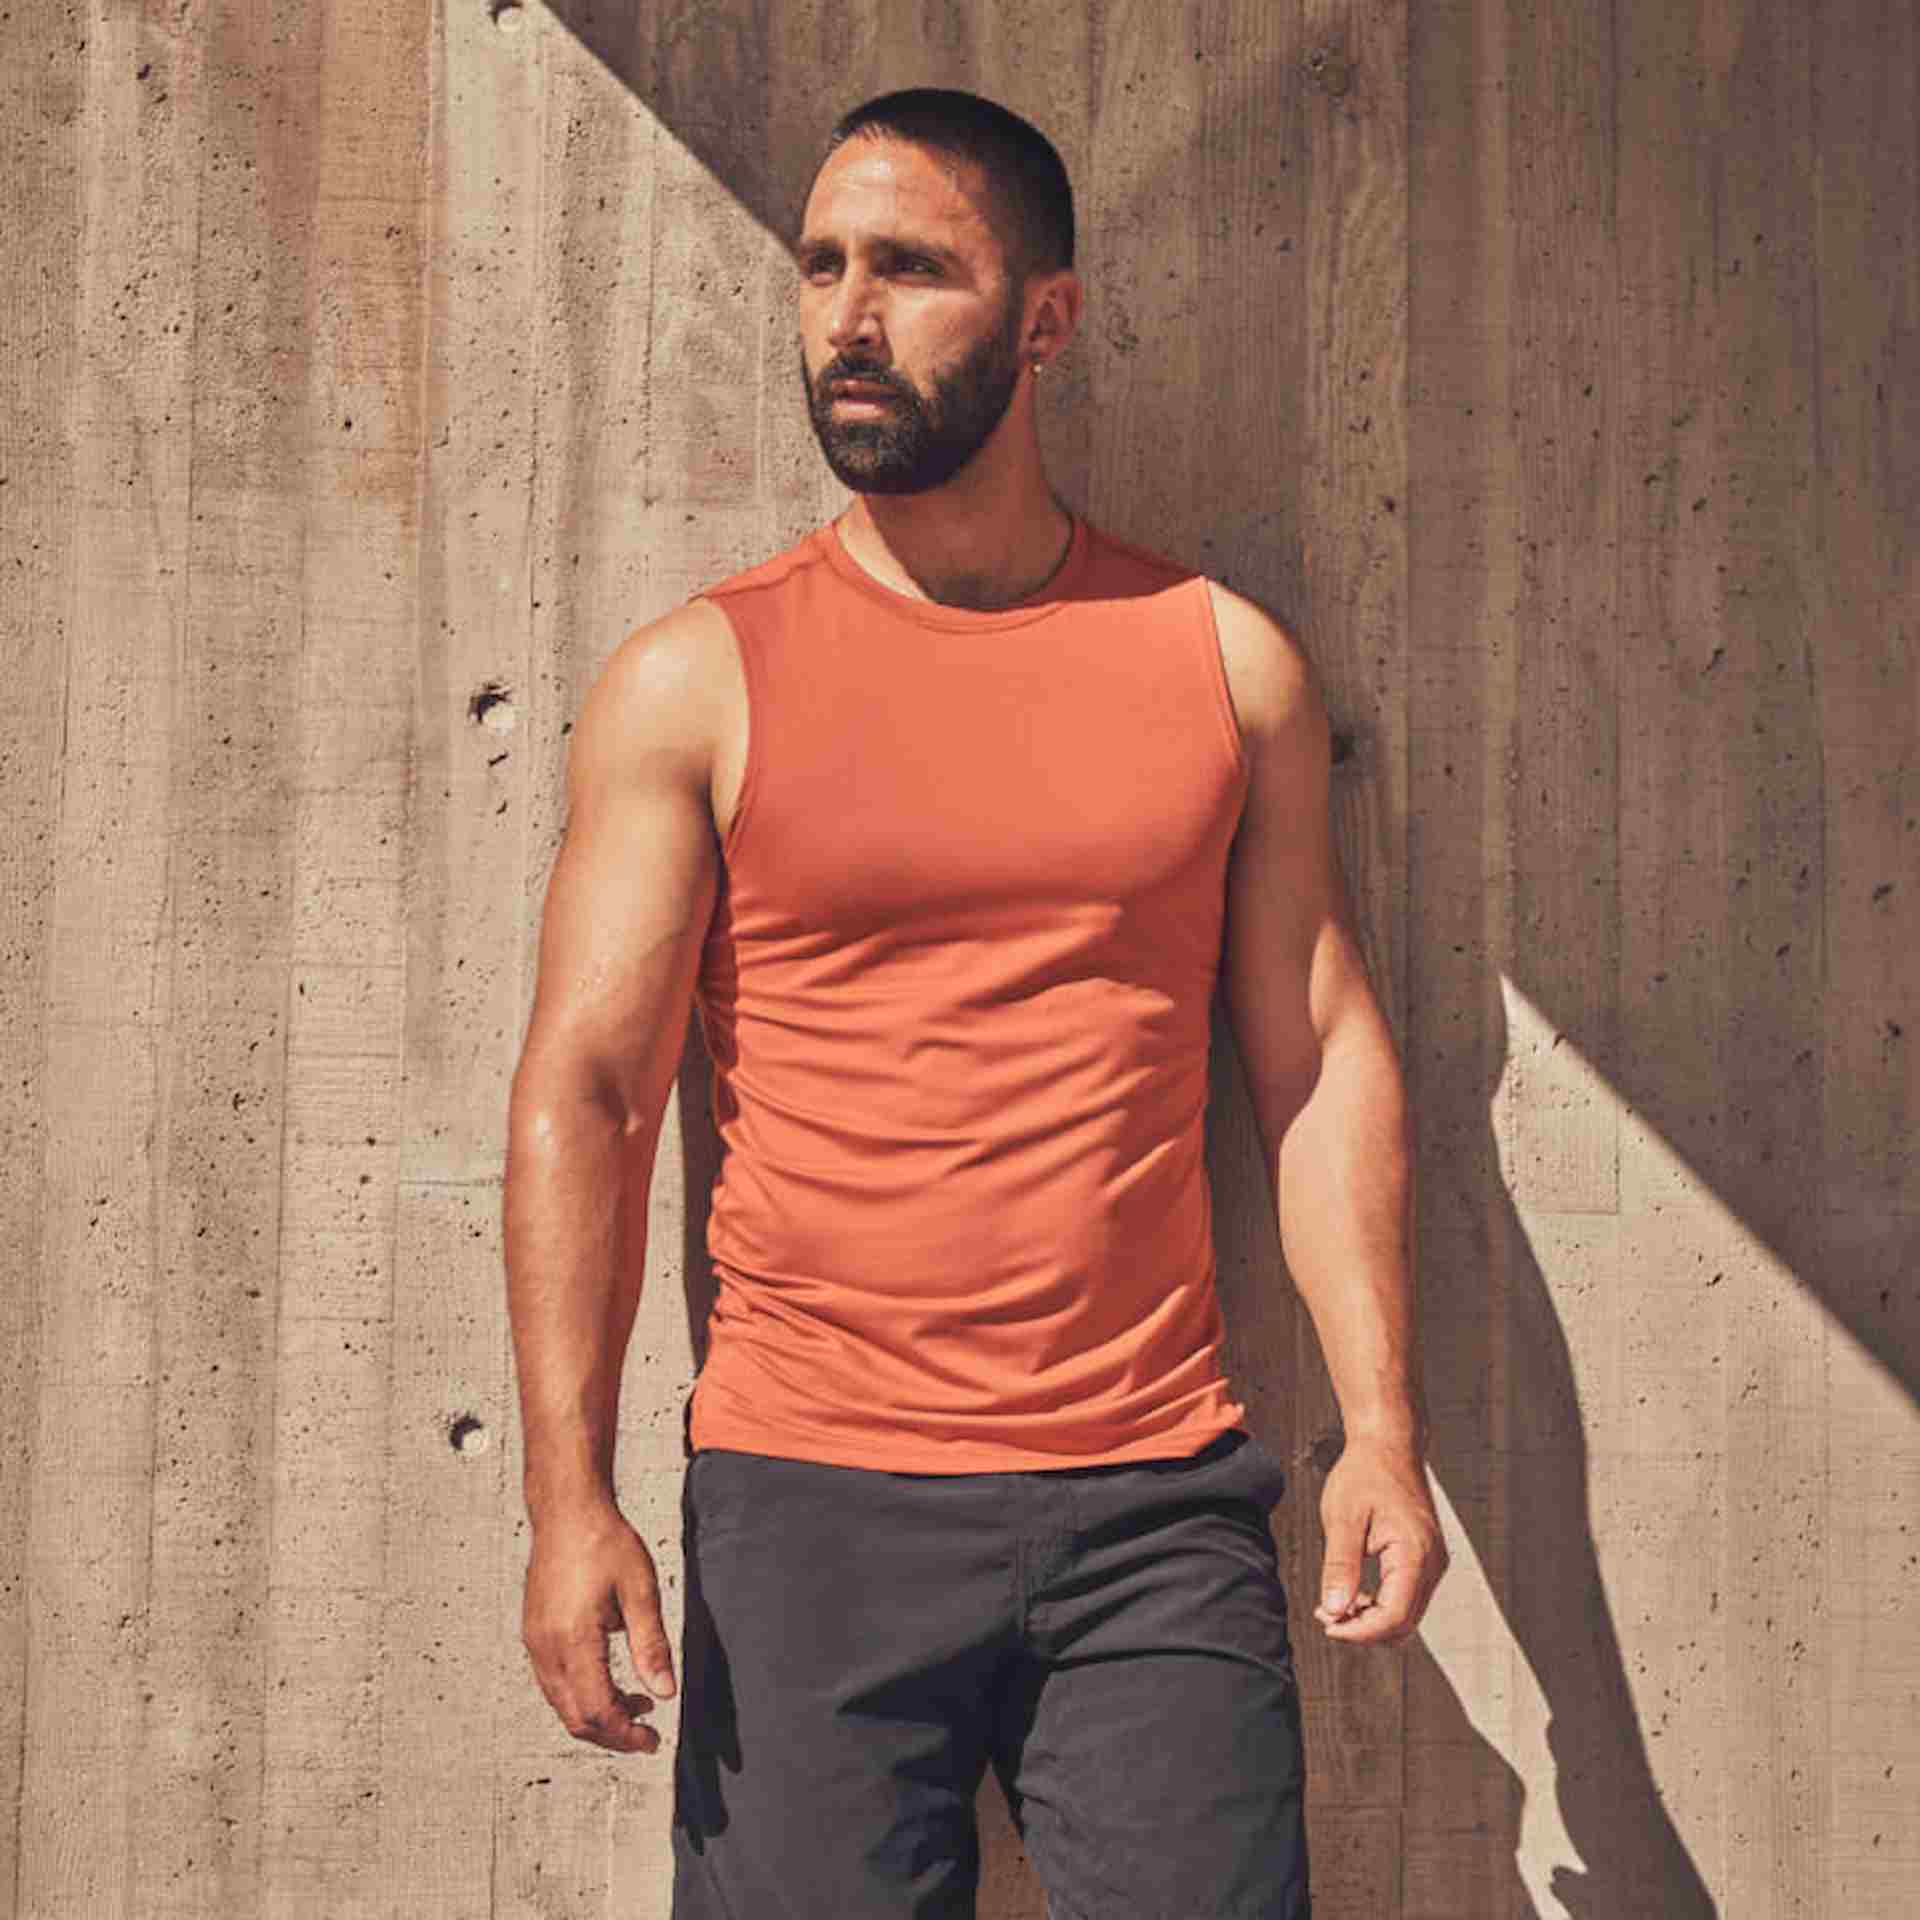 Male athlete wearing workout clothes leaning against cement wall